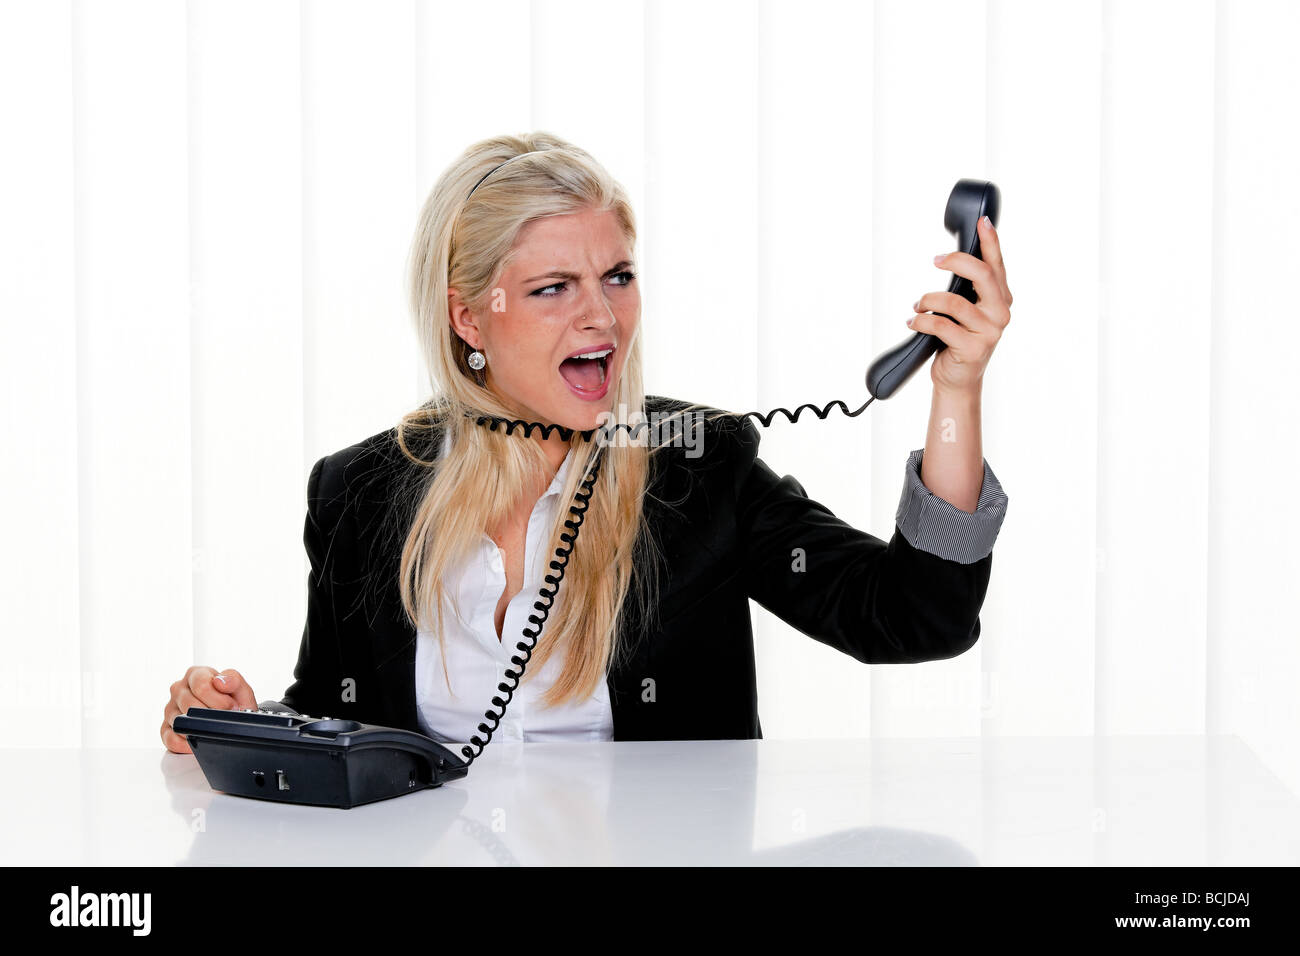 Young woman with problems and stress in the office Stock Photo